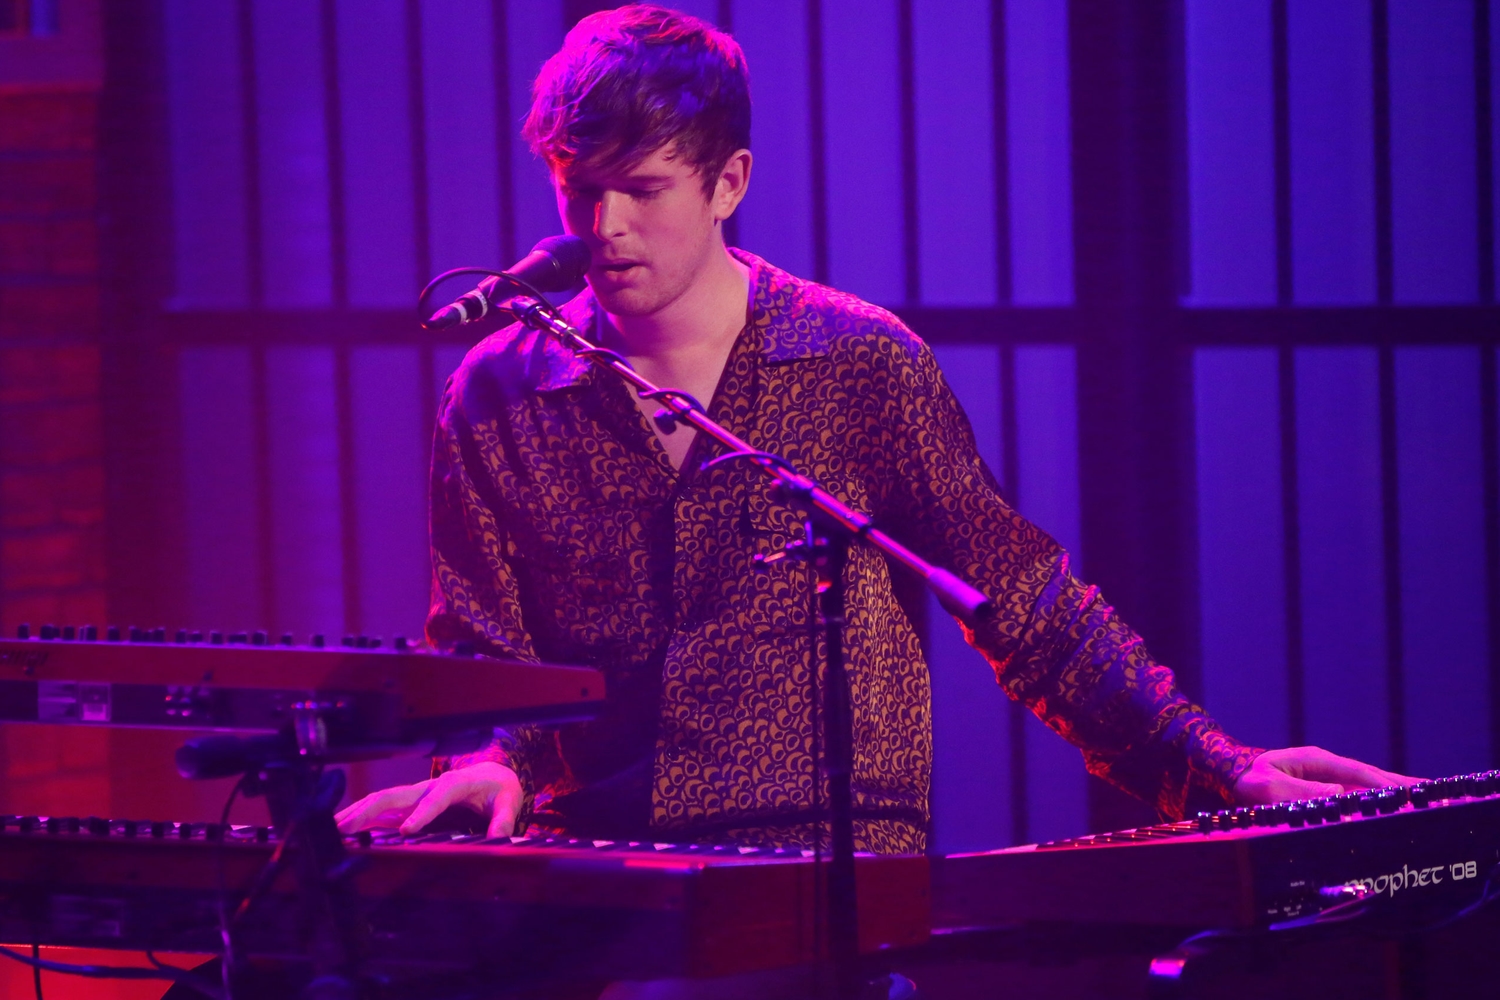 James Blake plays ‘My Willing Heart’ on Seth Meyers